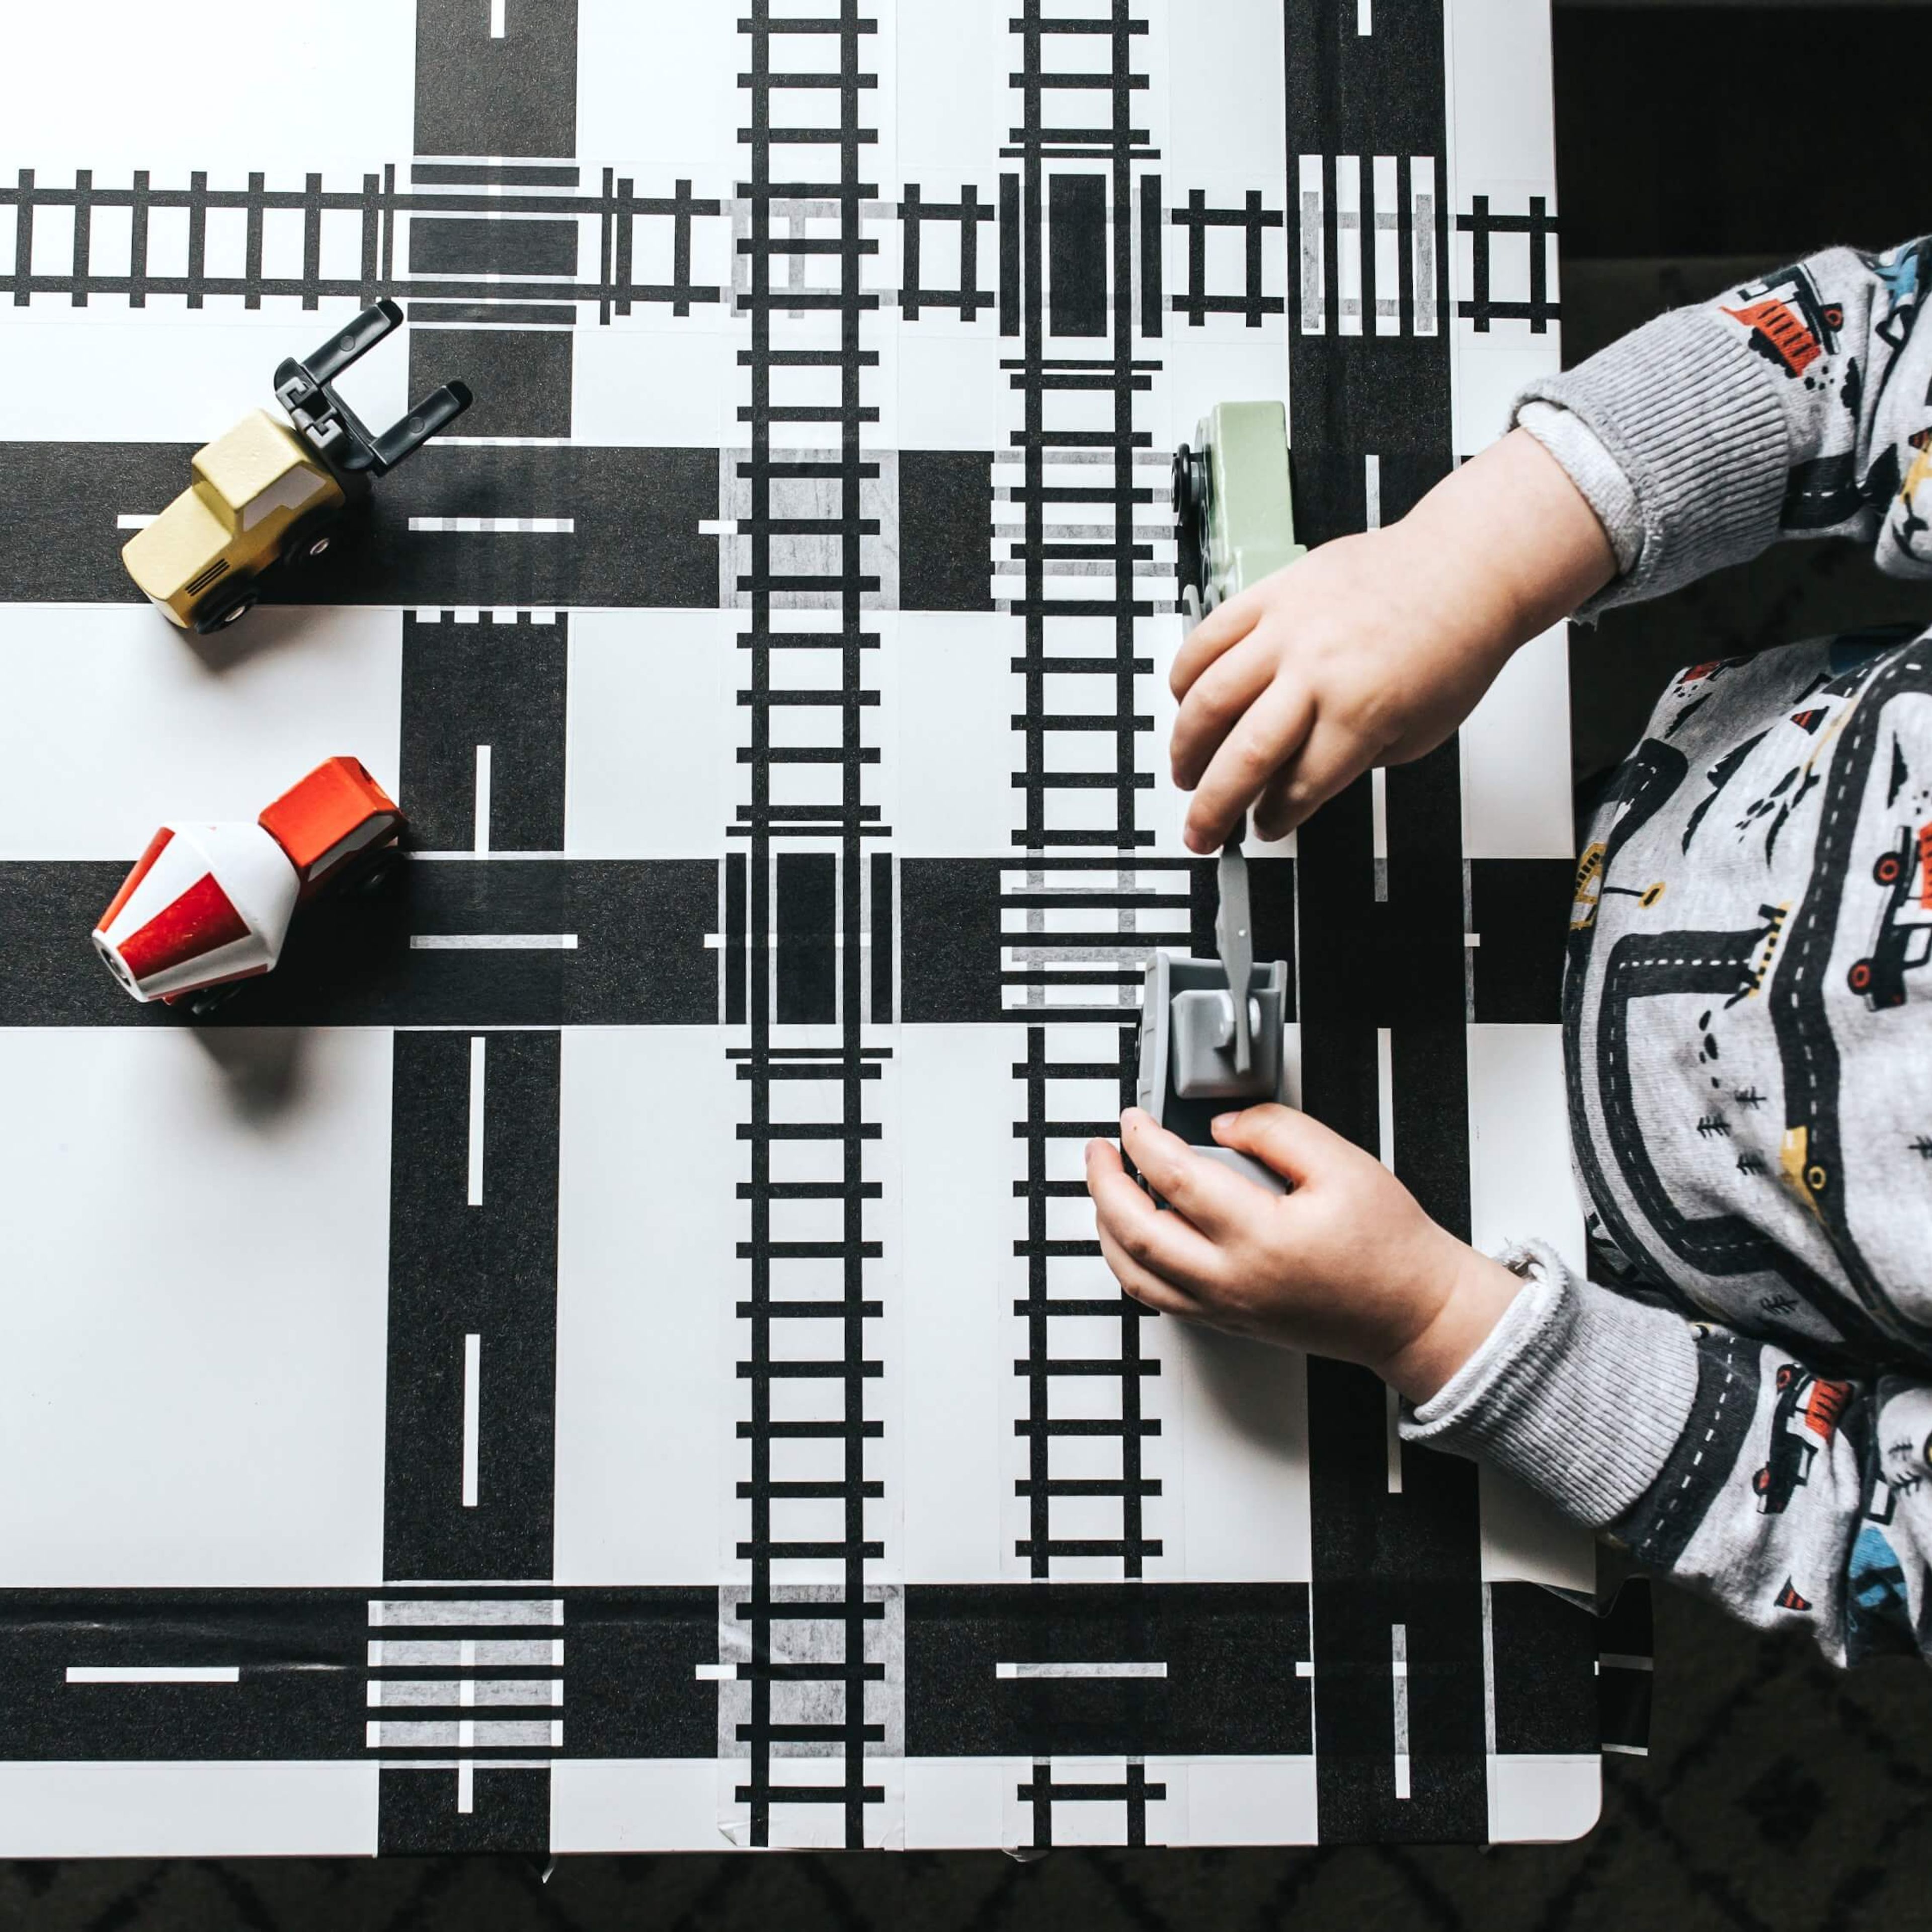 Roadway tape 4-rolls: "He can play with his cars anywhere!"